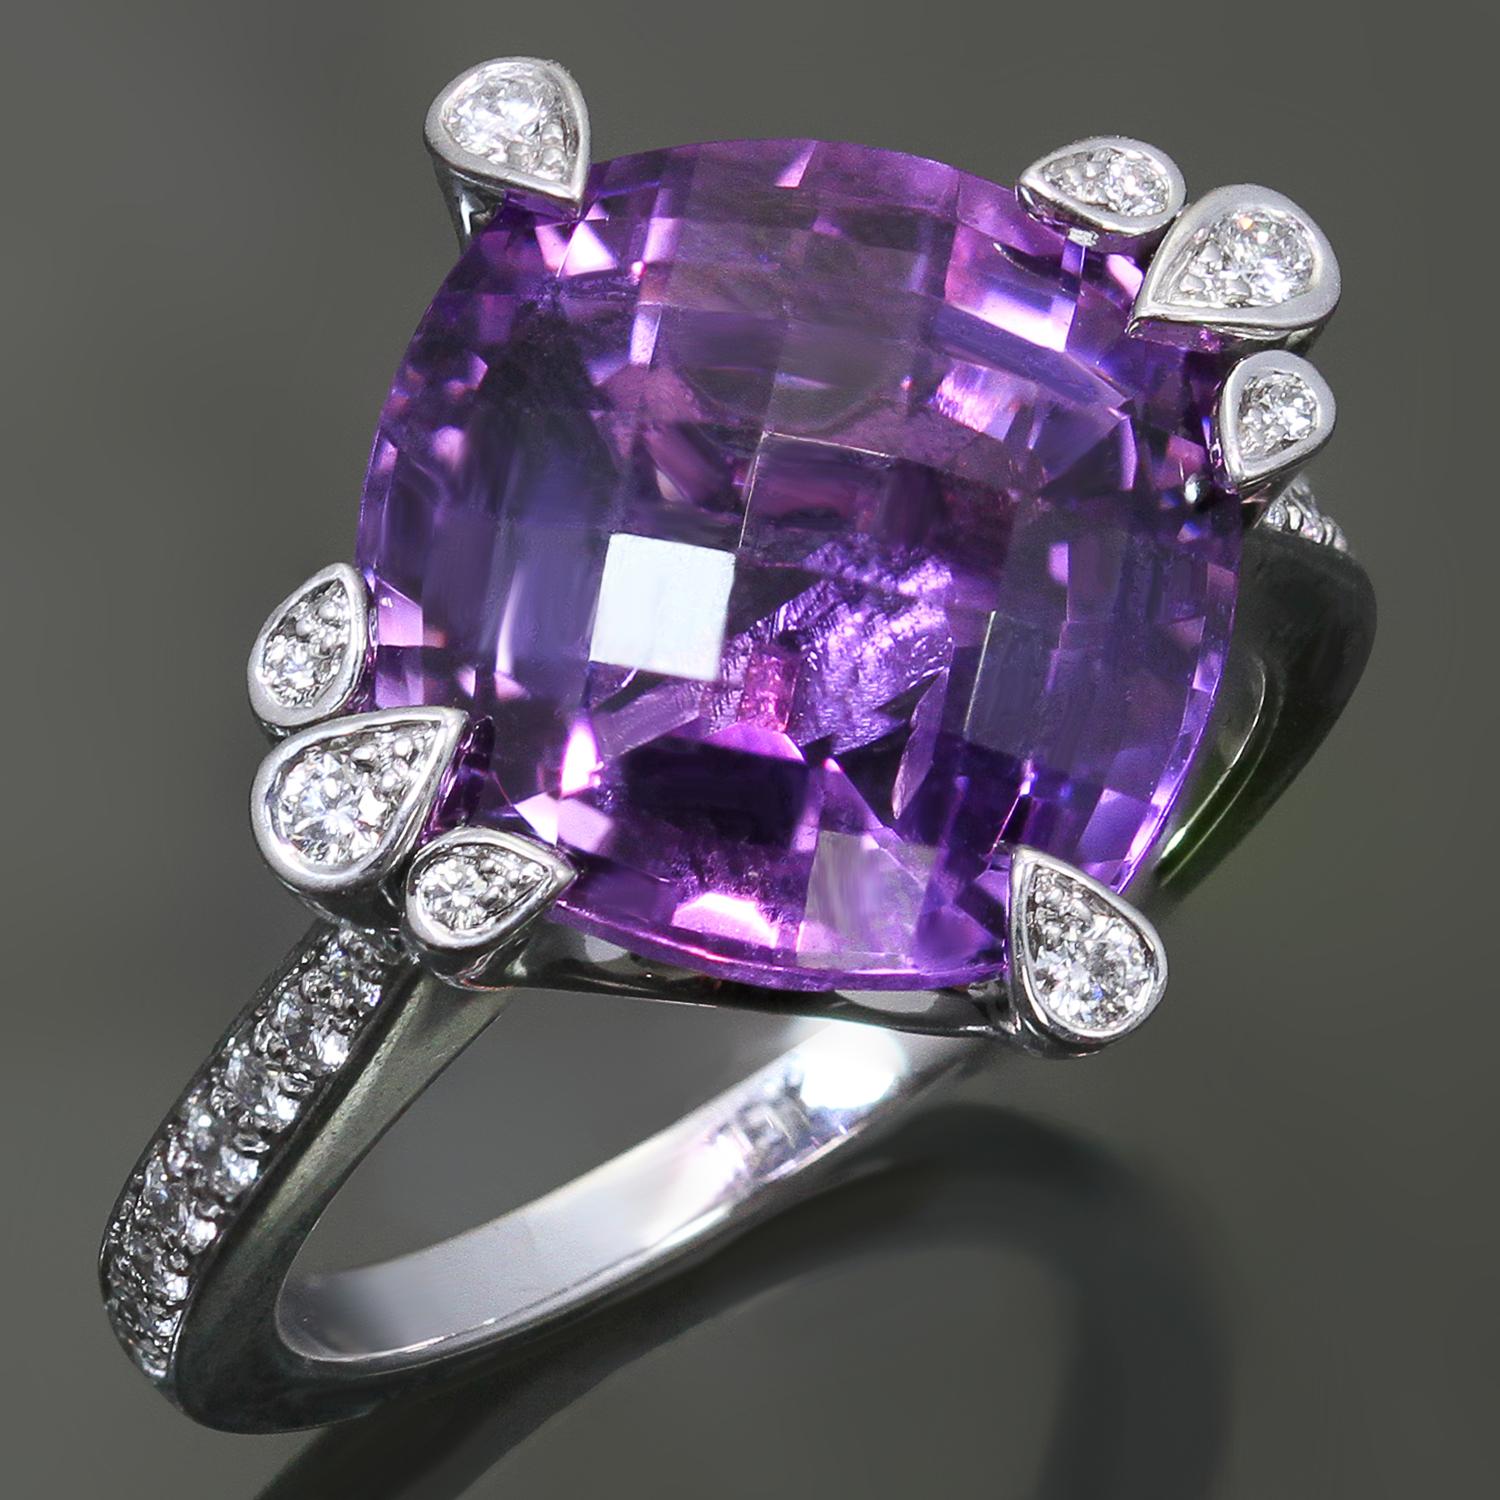 This magnificent ring from Cartier's Inde Mysterieuse collection is crafted in 18k white gold and set with a cushion-cut faceted amethyst surrounded with round brilliant diamonds weighing an estimated 0.30 carats. Made in France circa 2000s.